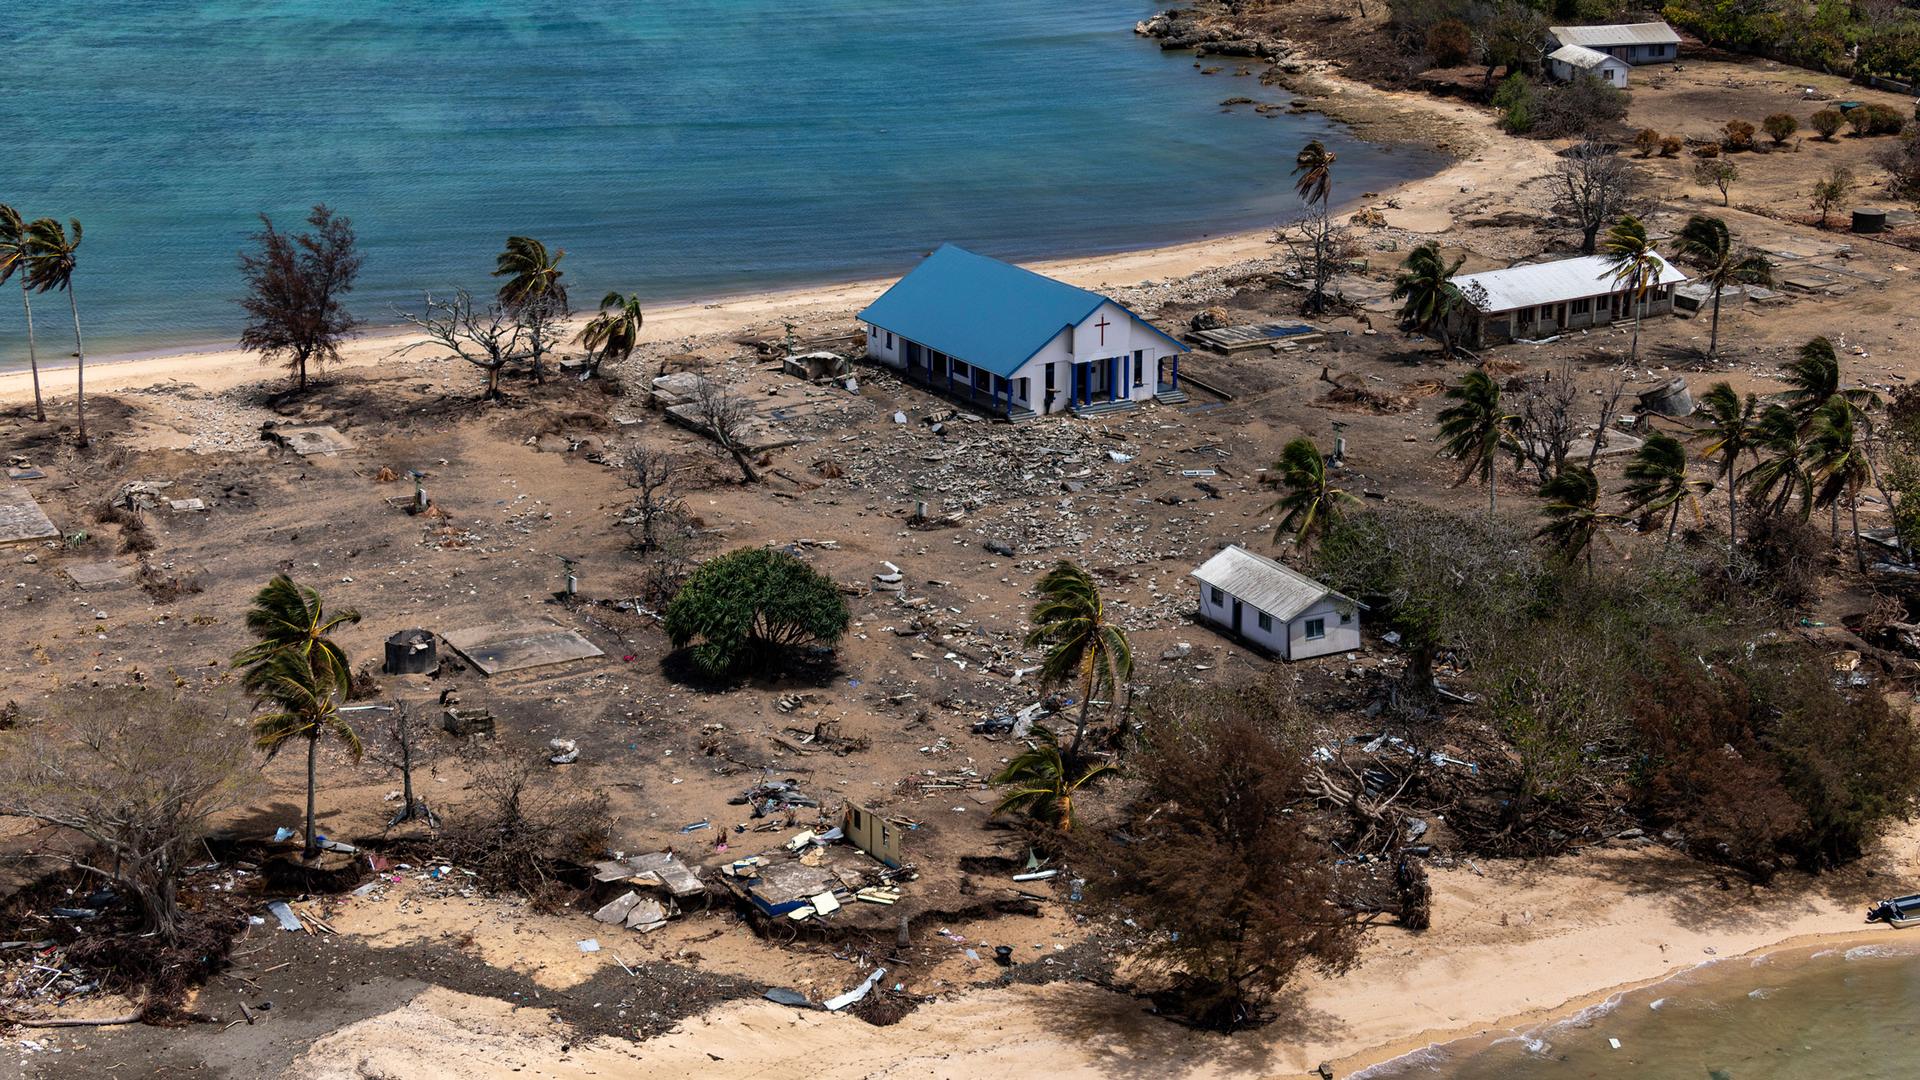 In this photo provided by the Australian Defense Force, debris from damaged building and trees are strewn around on Atata Island in Tonga, on Jan. 28, 2022.